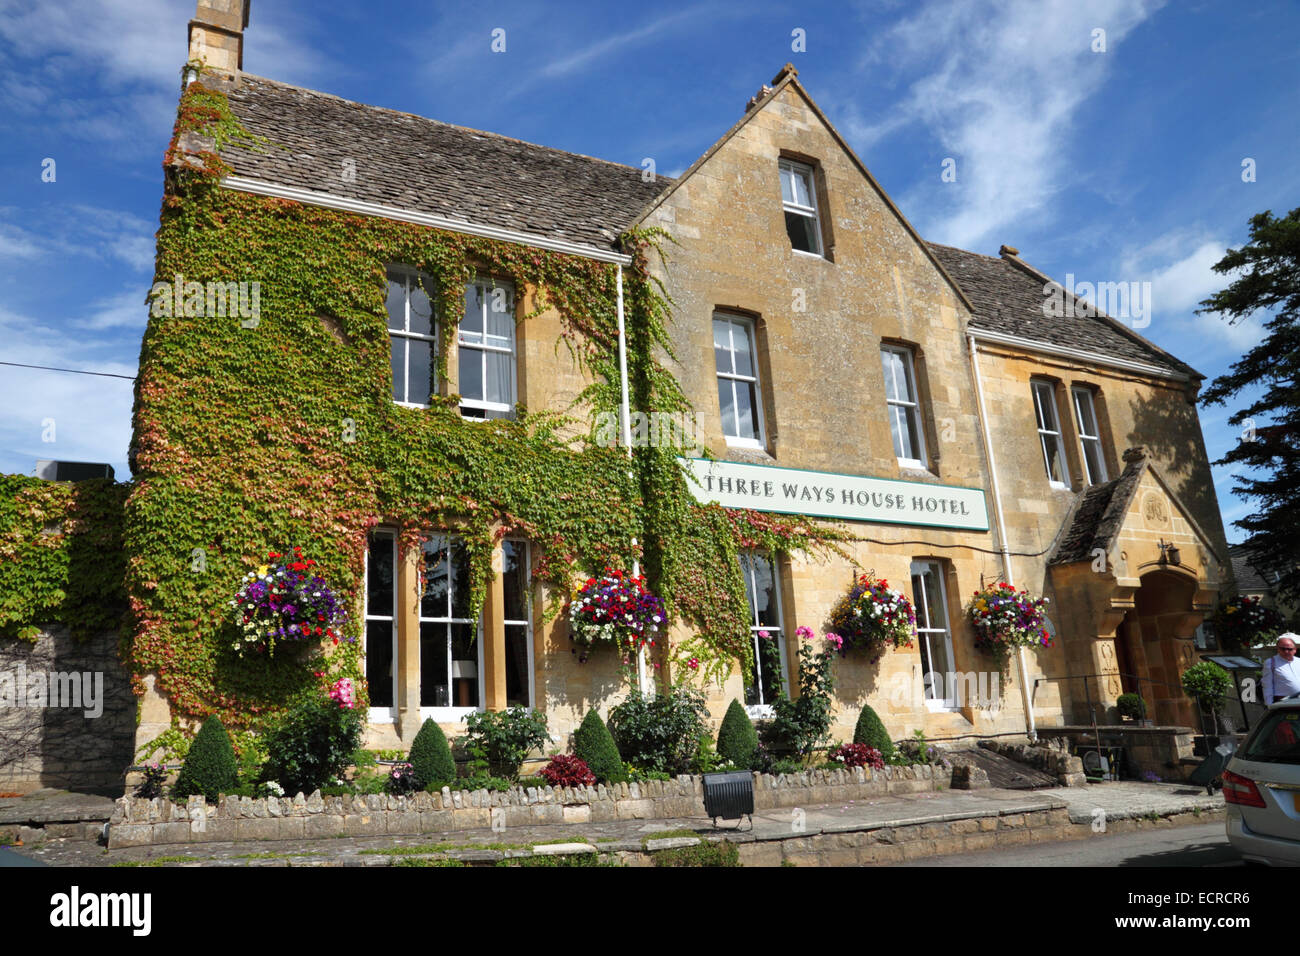 A country house hotel with ivy-covered walls and a Three Ways House sign. Stock Photo